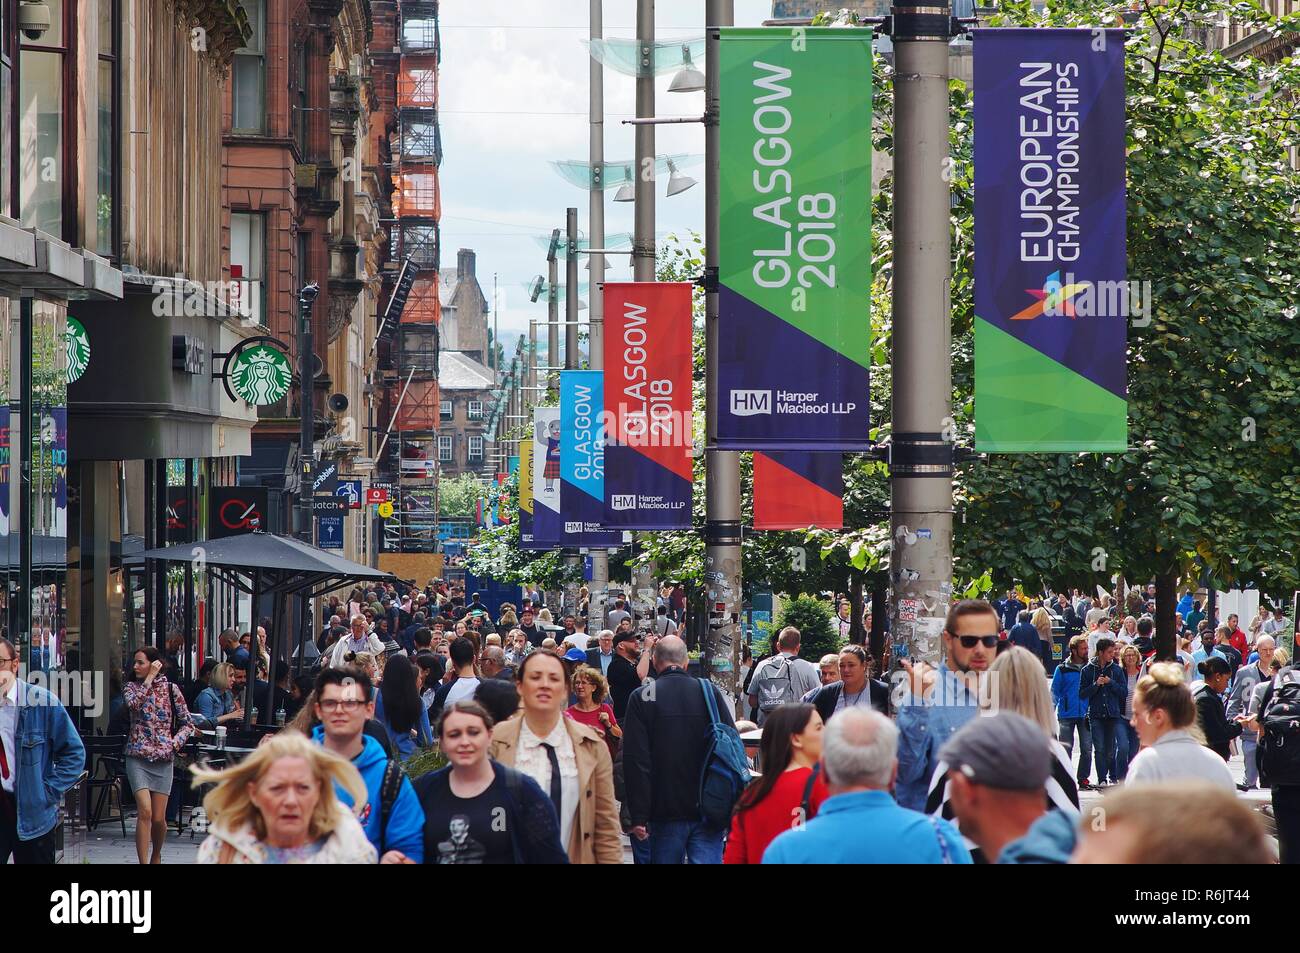 Crowded Buchanan street during the European Championships in 2018, with the event banners hanging on the lamp posts, Glasgow, UK Stock Photo